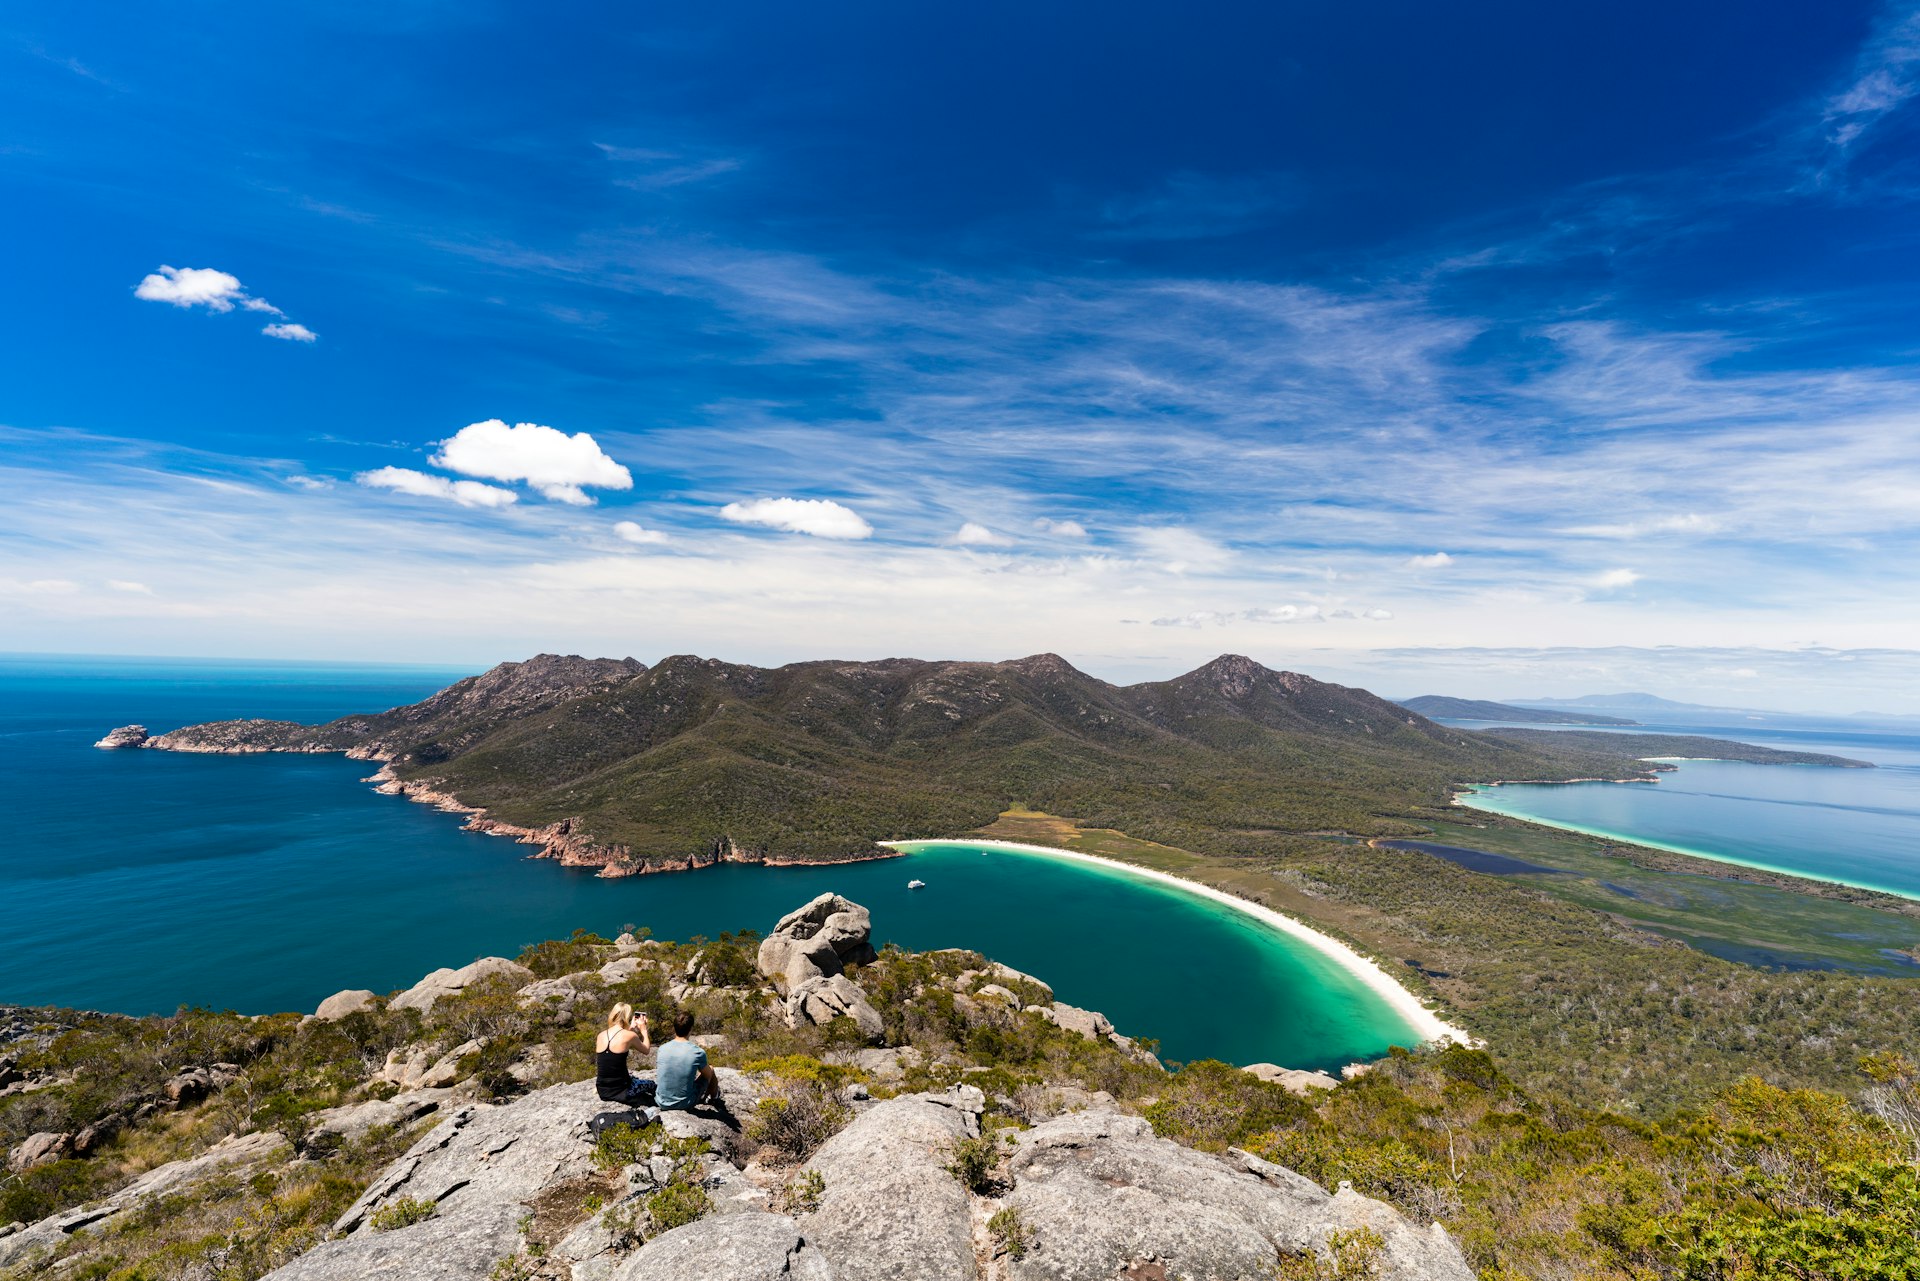 Wineglass Bay viewed from the summit of Mt. Amos, a popular hike within Freycinet National Park, Tasmania, Australia